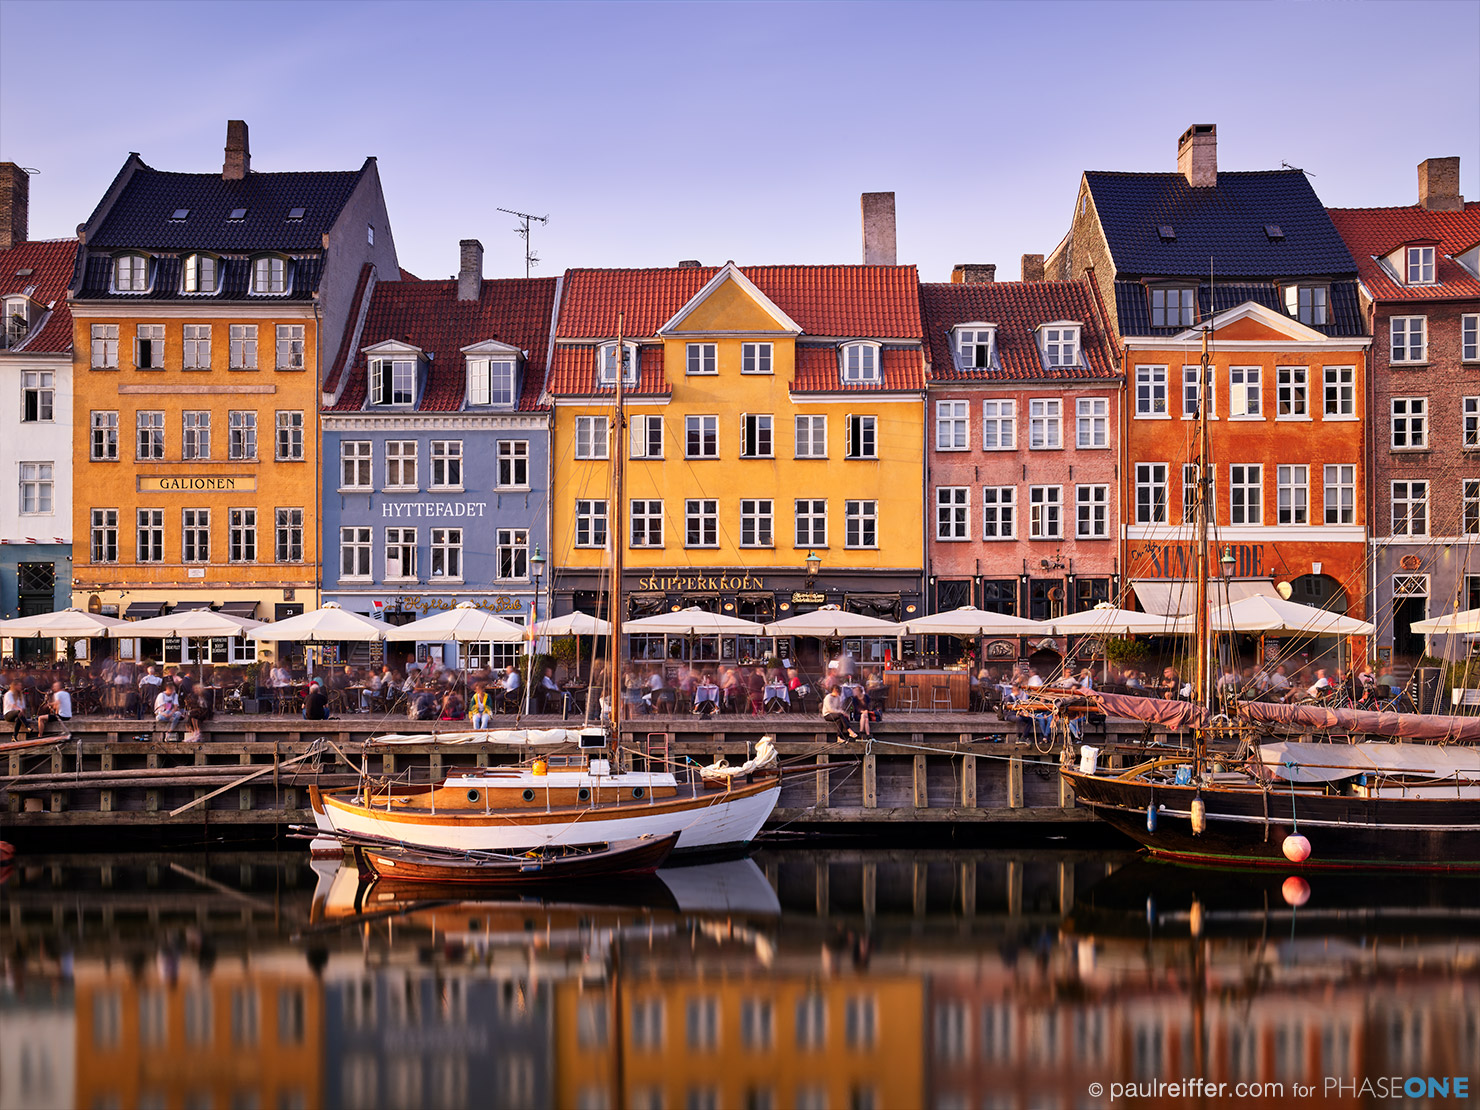 Nyhavn day long exposure Paul Reiffer Phase One iQ4 Launch Test Images XF 150MP 151 Megapixels Sample Images Hero Shot Copenhagen Harbour New Waterfront